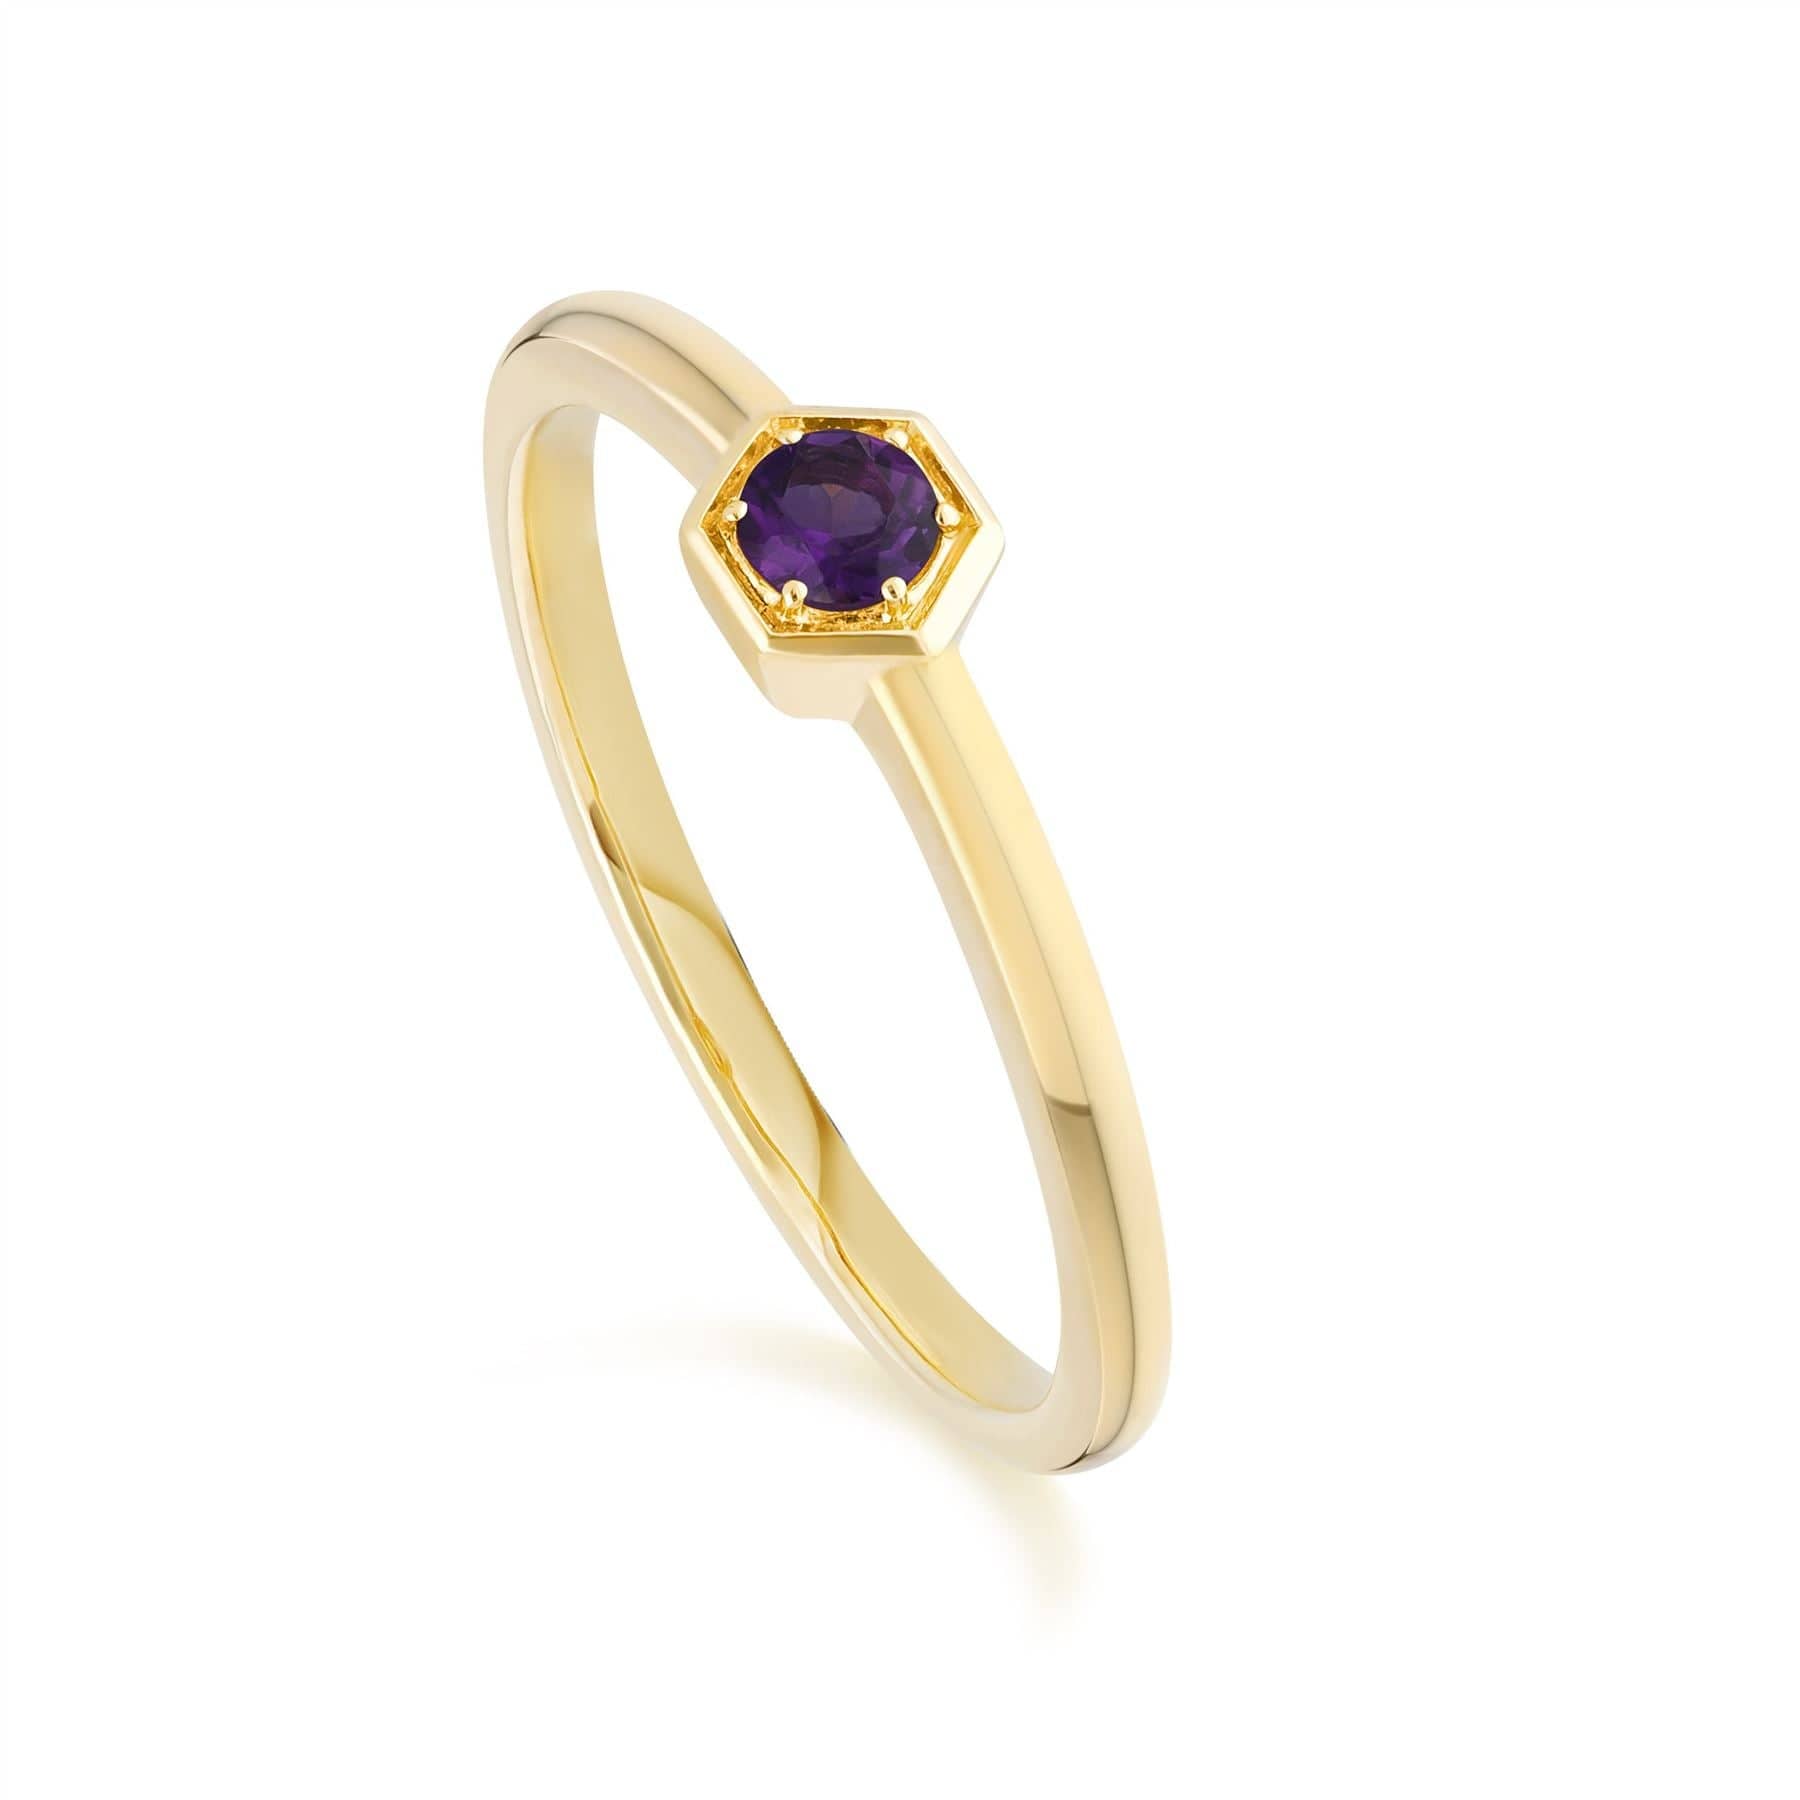 Honeycomb Inspired Amethyst Ring in 9ct Yellow Gold